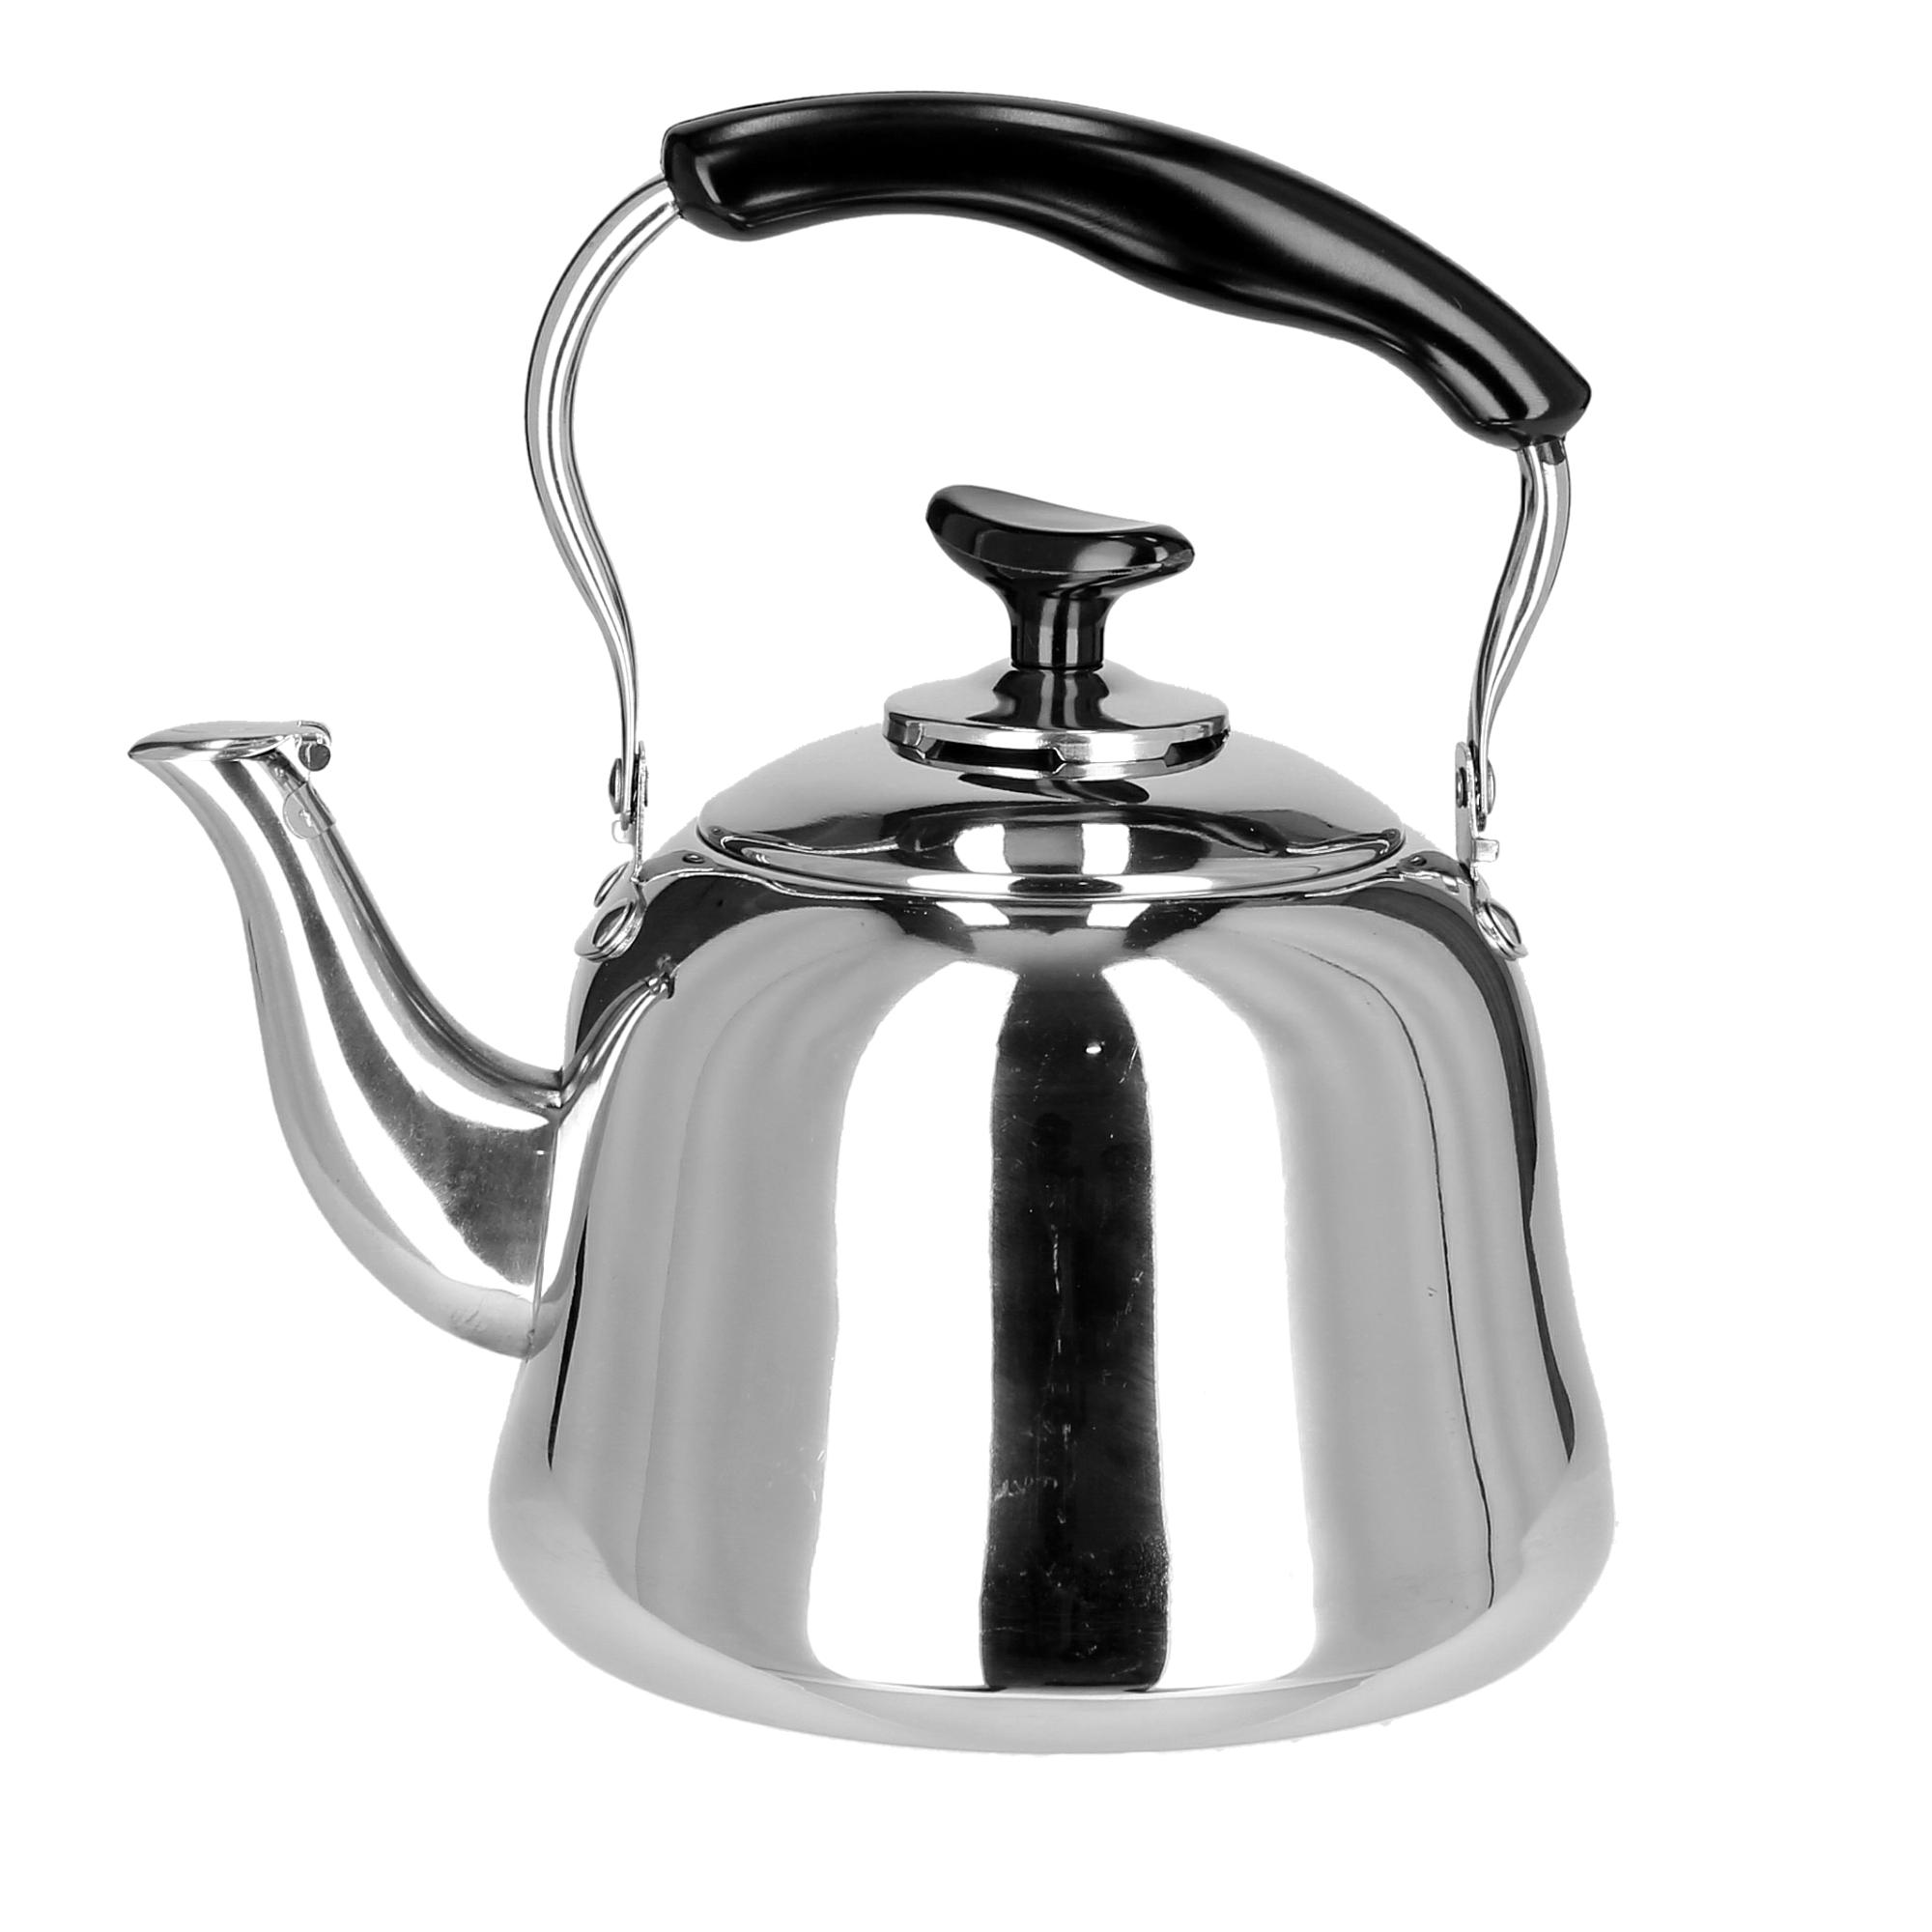 Royalford 1L Stainless Steel Whistling Kettle - Portable Whistling Tea Kettle With Heat Resistant